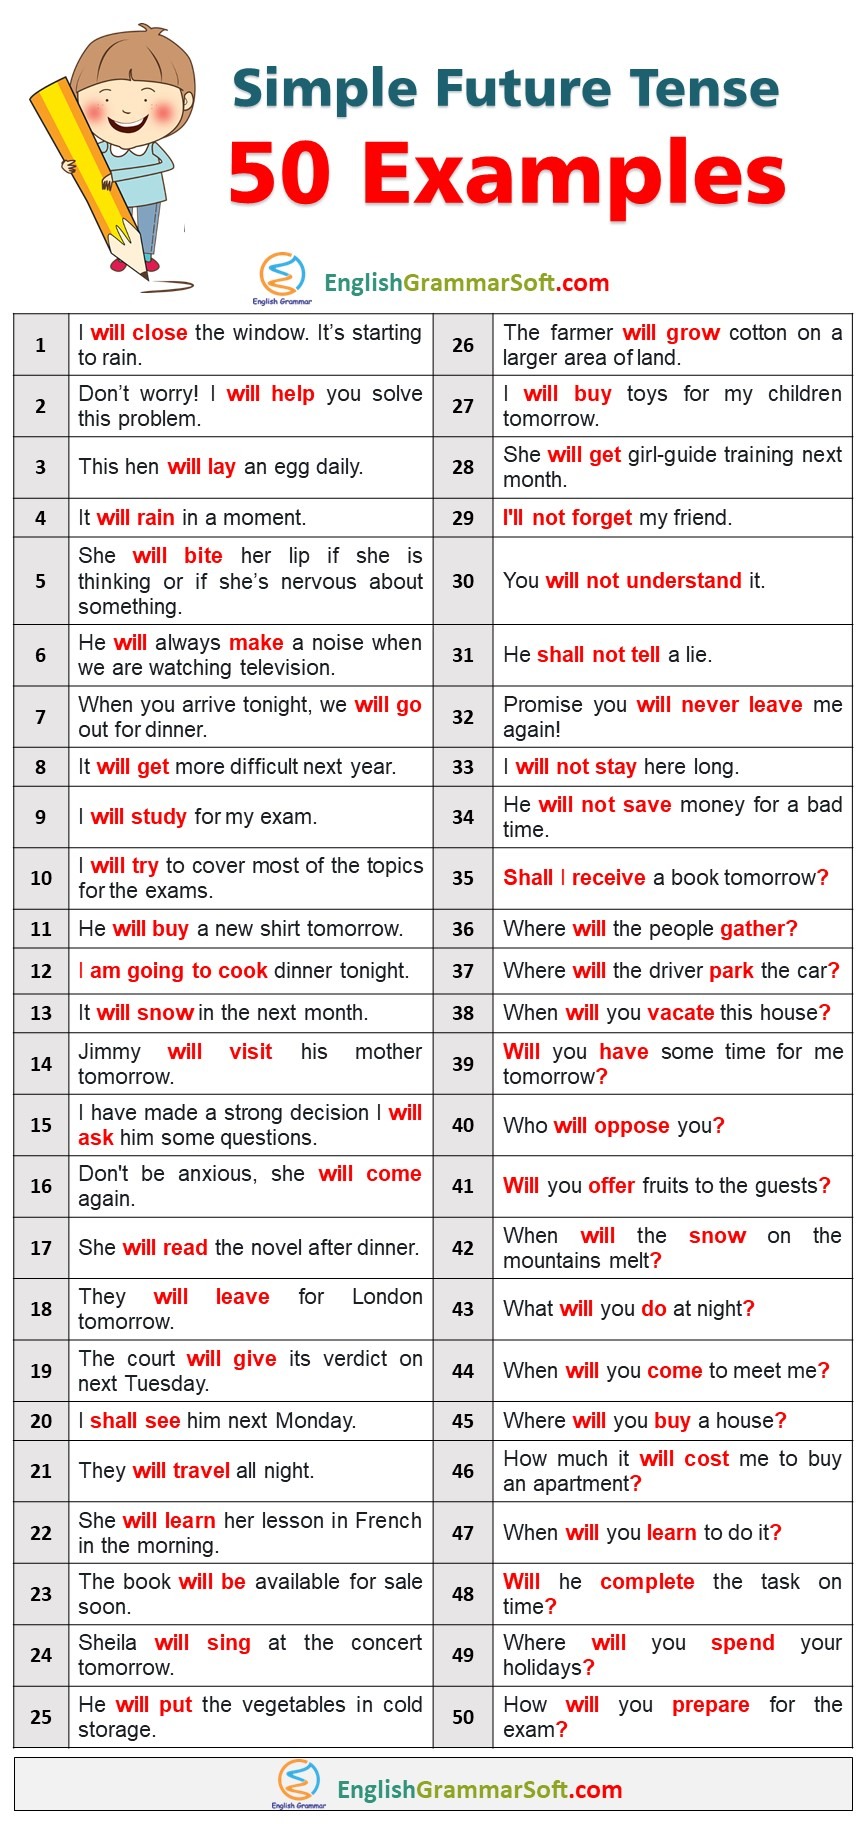 indefinite-pronouns-verbs-past-present-and-future-tense-english-my